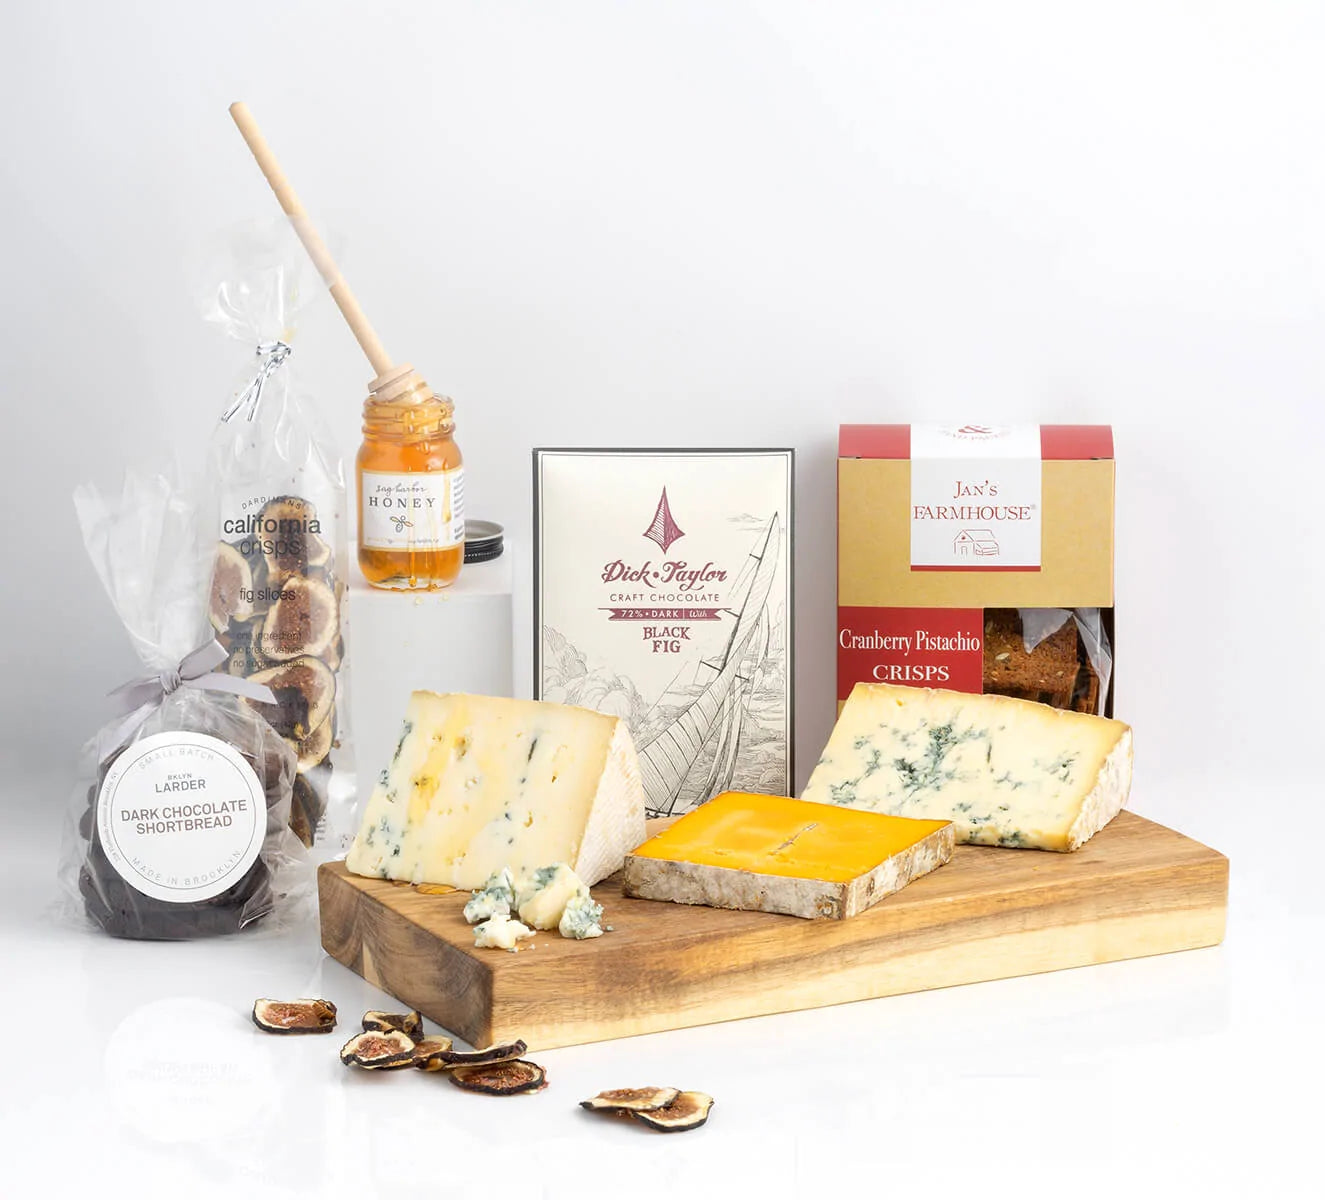 A beautiful cheese and provisions spread